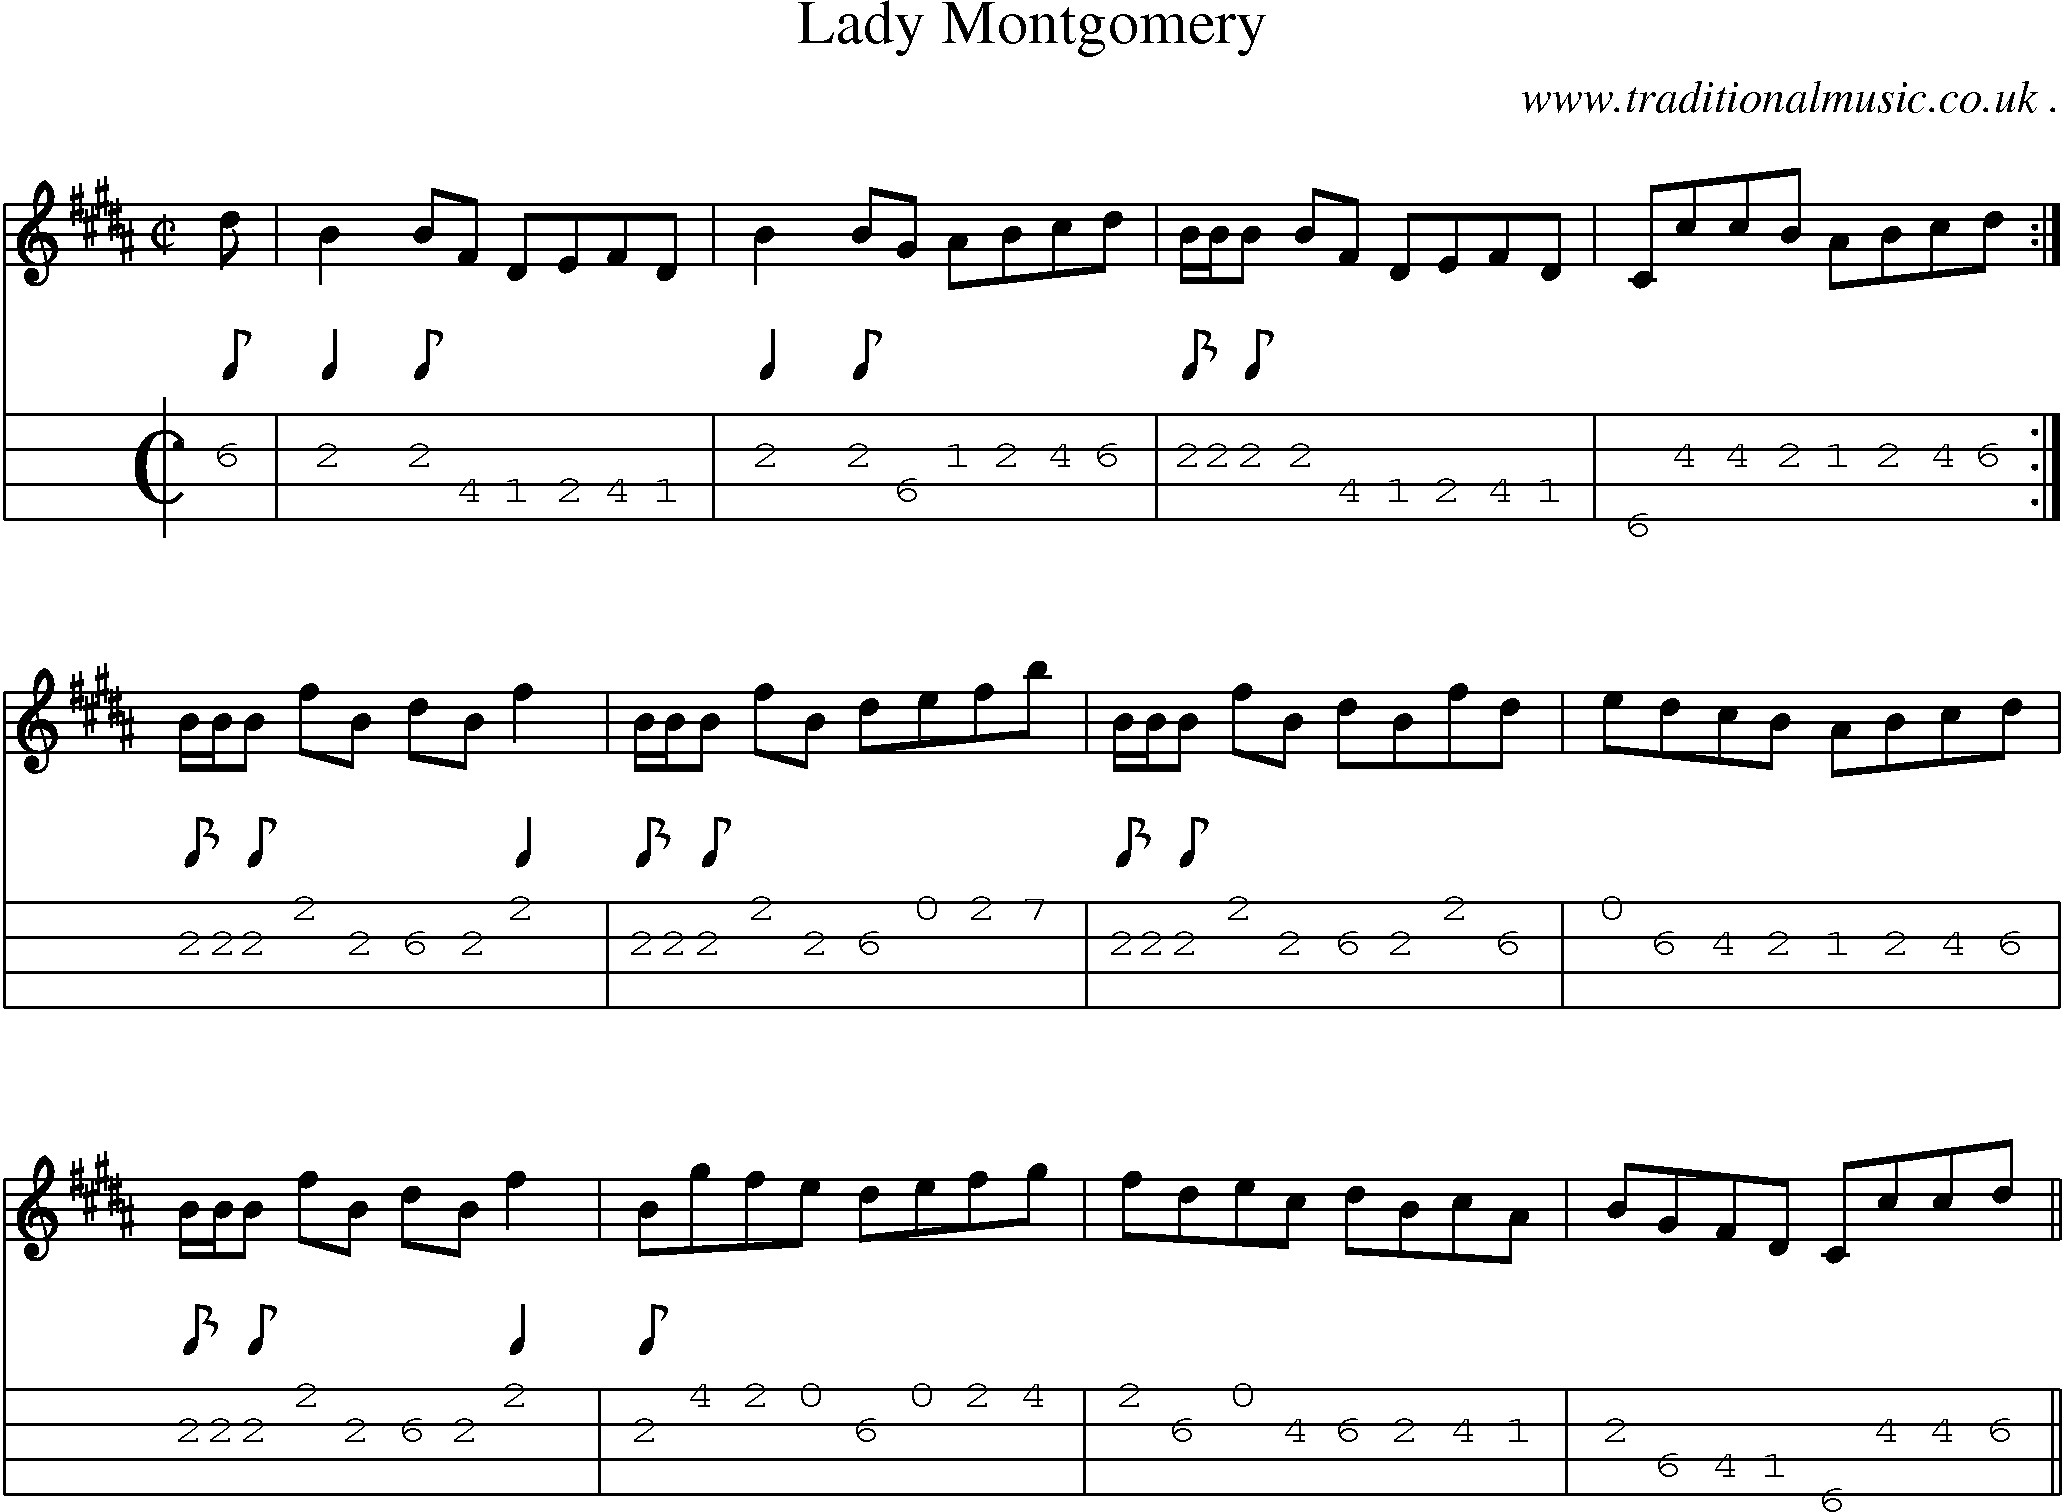 Sheet-music  score, Chords and Mandolin Tabs for Lady Montgomery